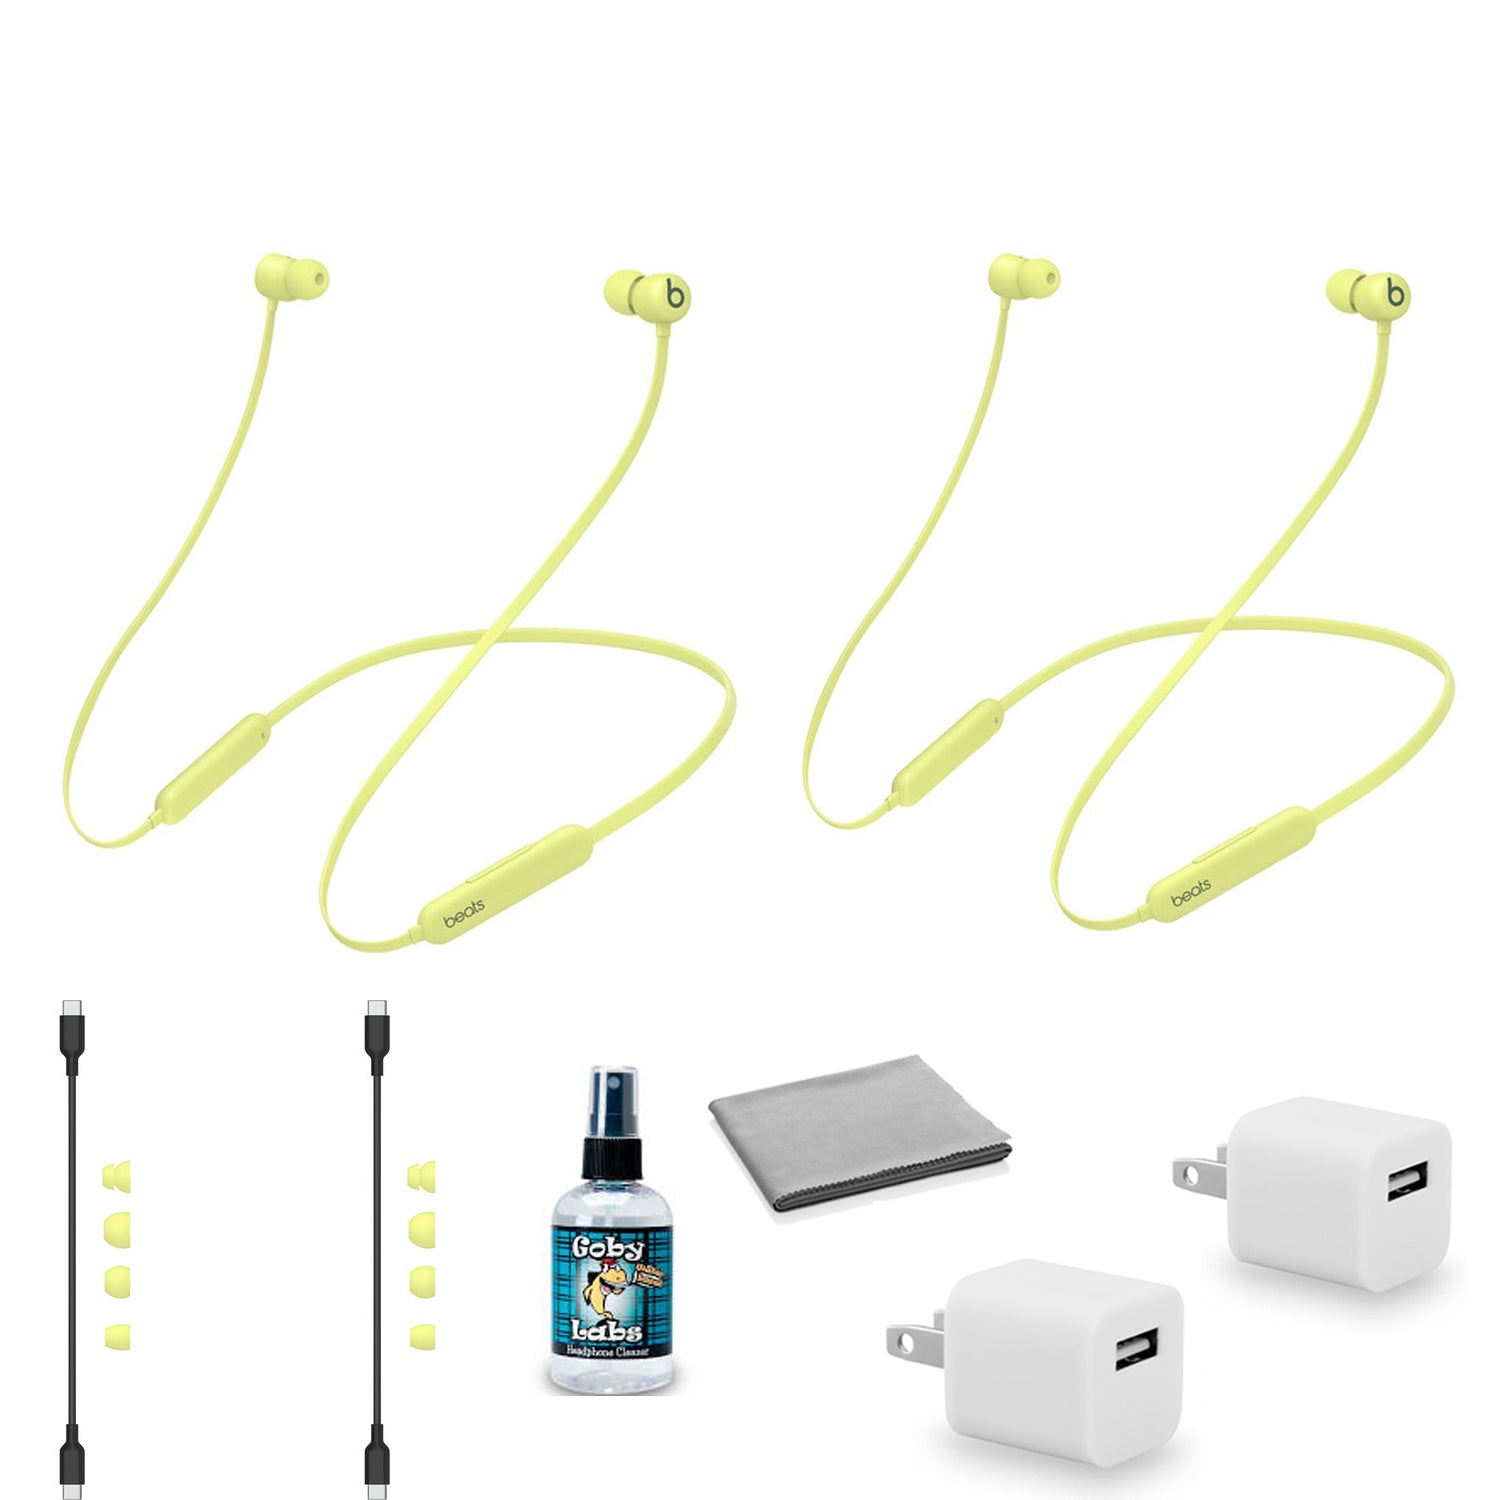 Beats by Dr. Dre Beats Flex Wireless In-Ear Headphones 2-Pack (Yuzu Yellow) MYMD2LL/A with Headphone Cleaner + More